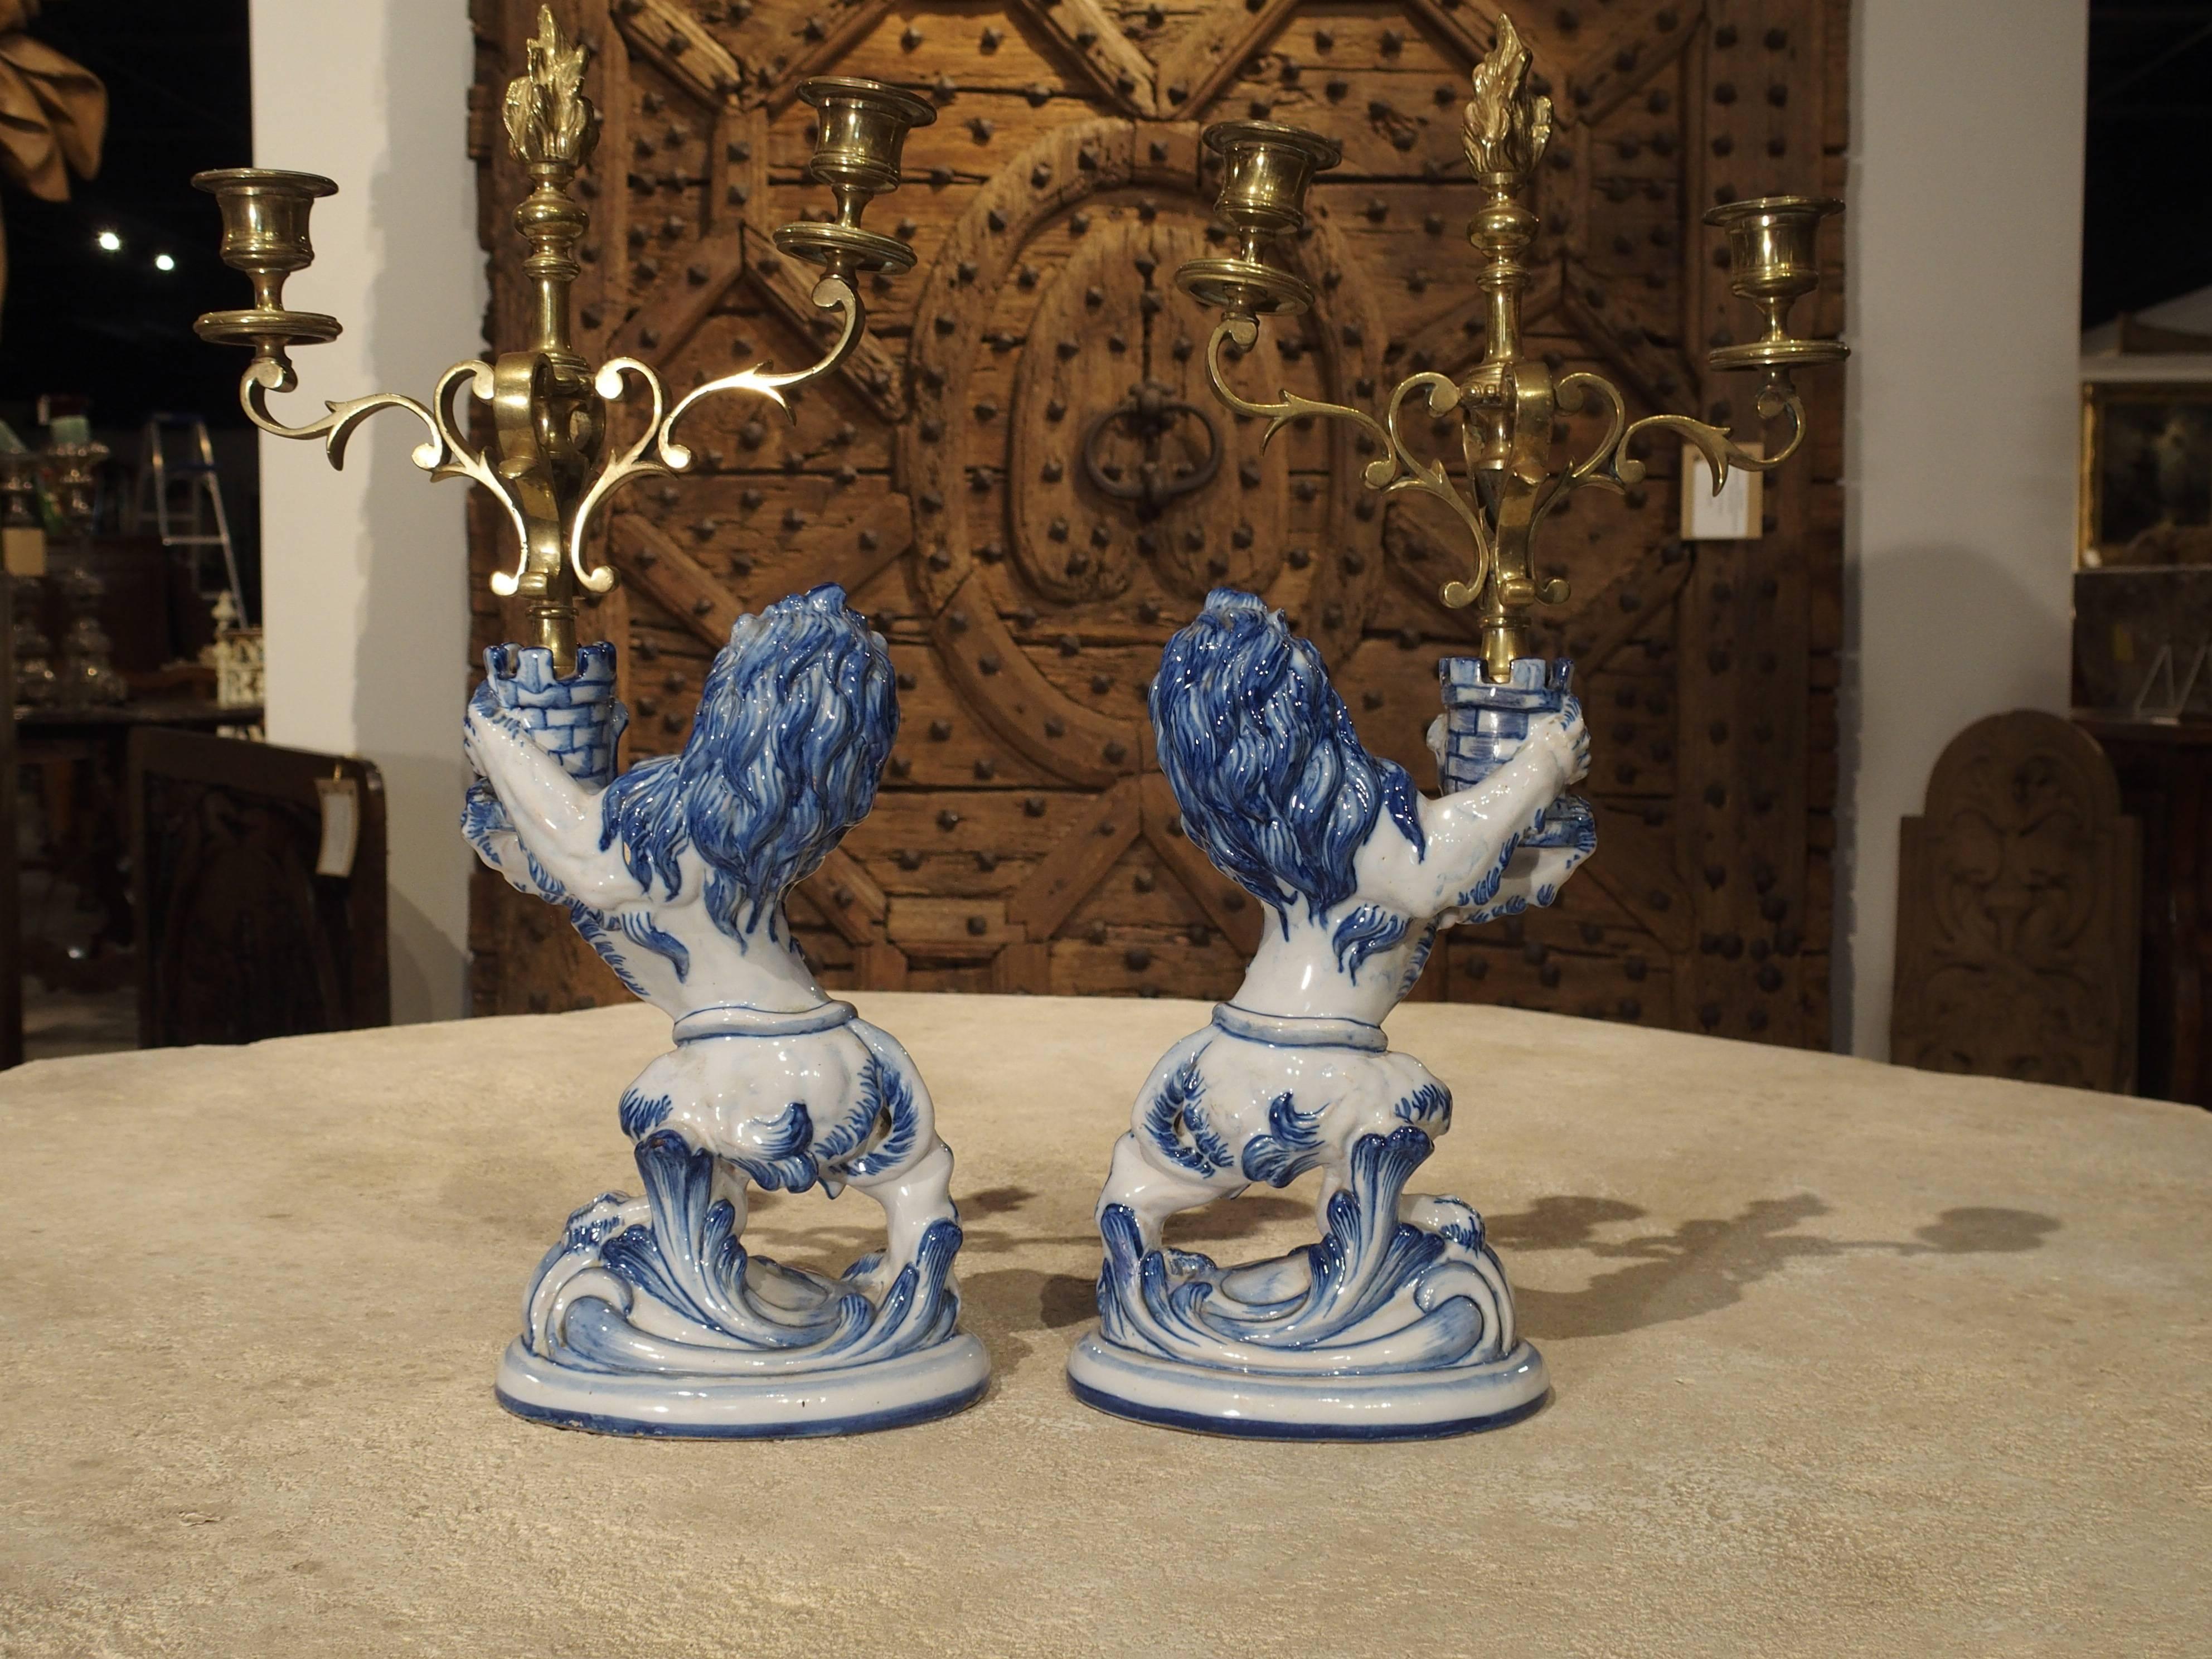 Pair of Late 1800s Emille Galle Faience Lion Candleholders from France 1